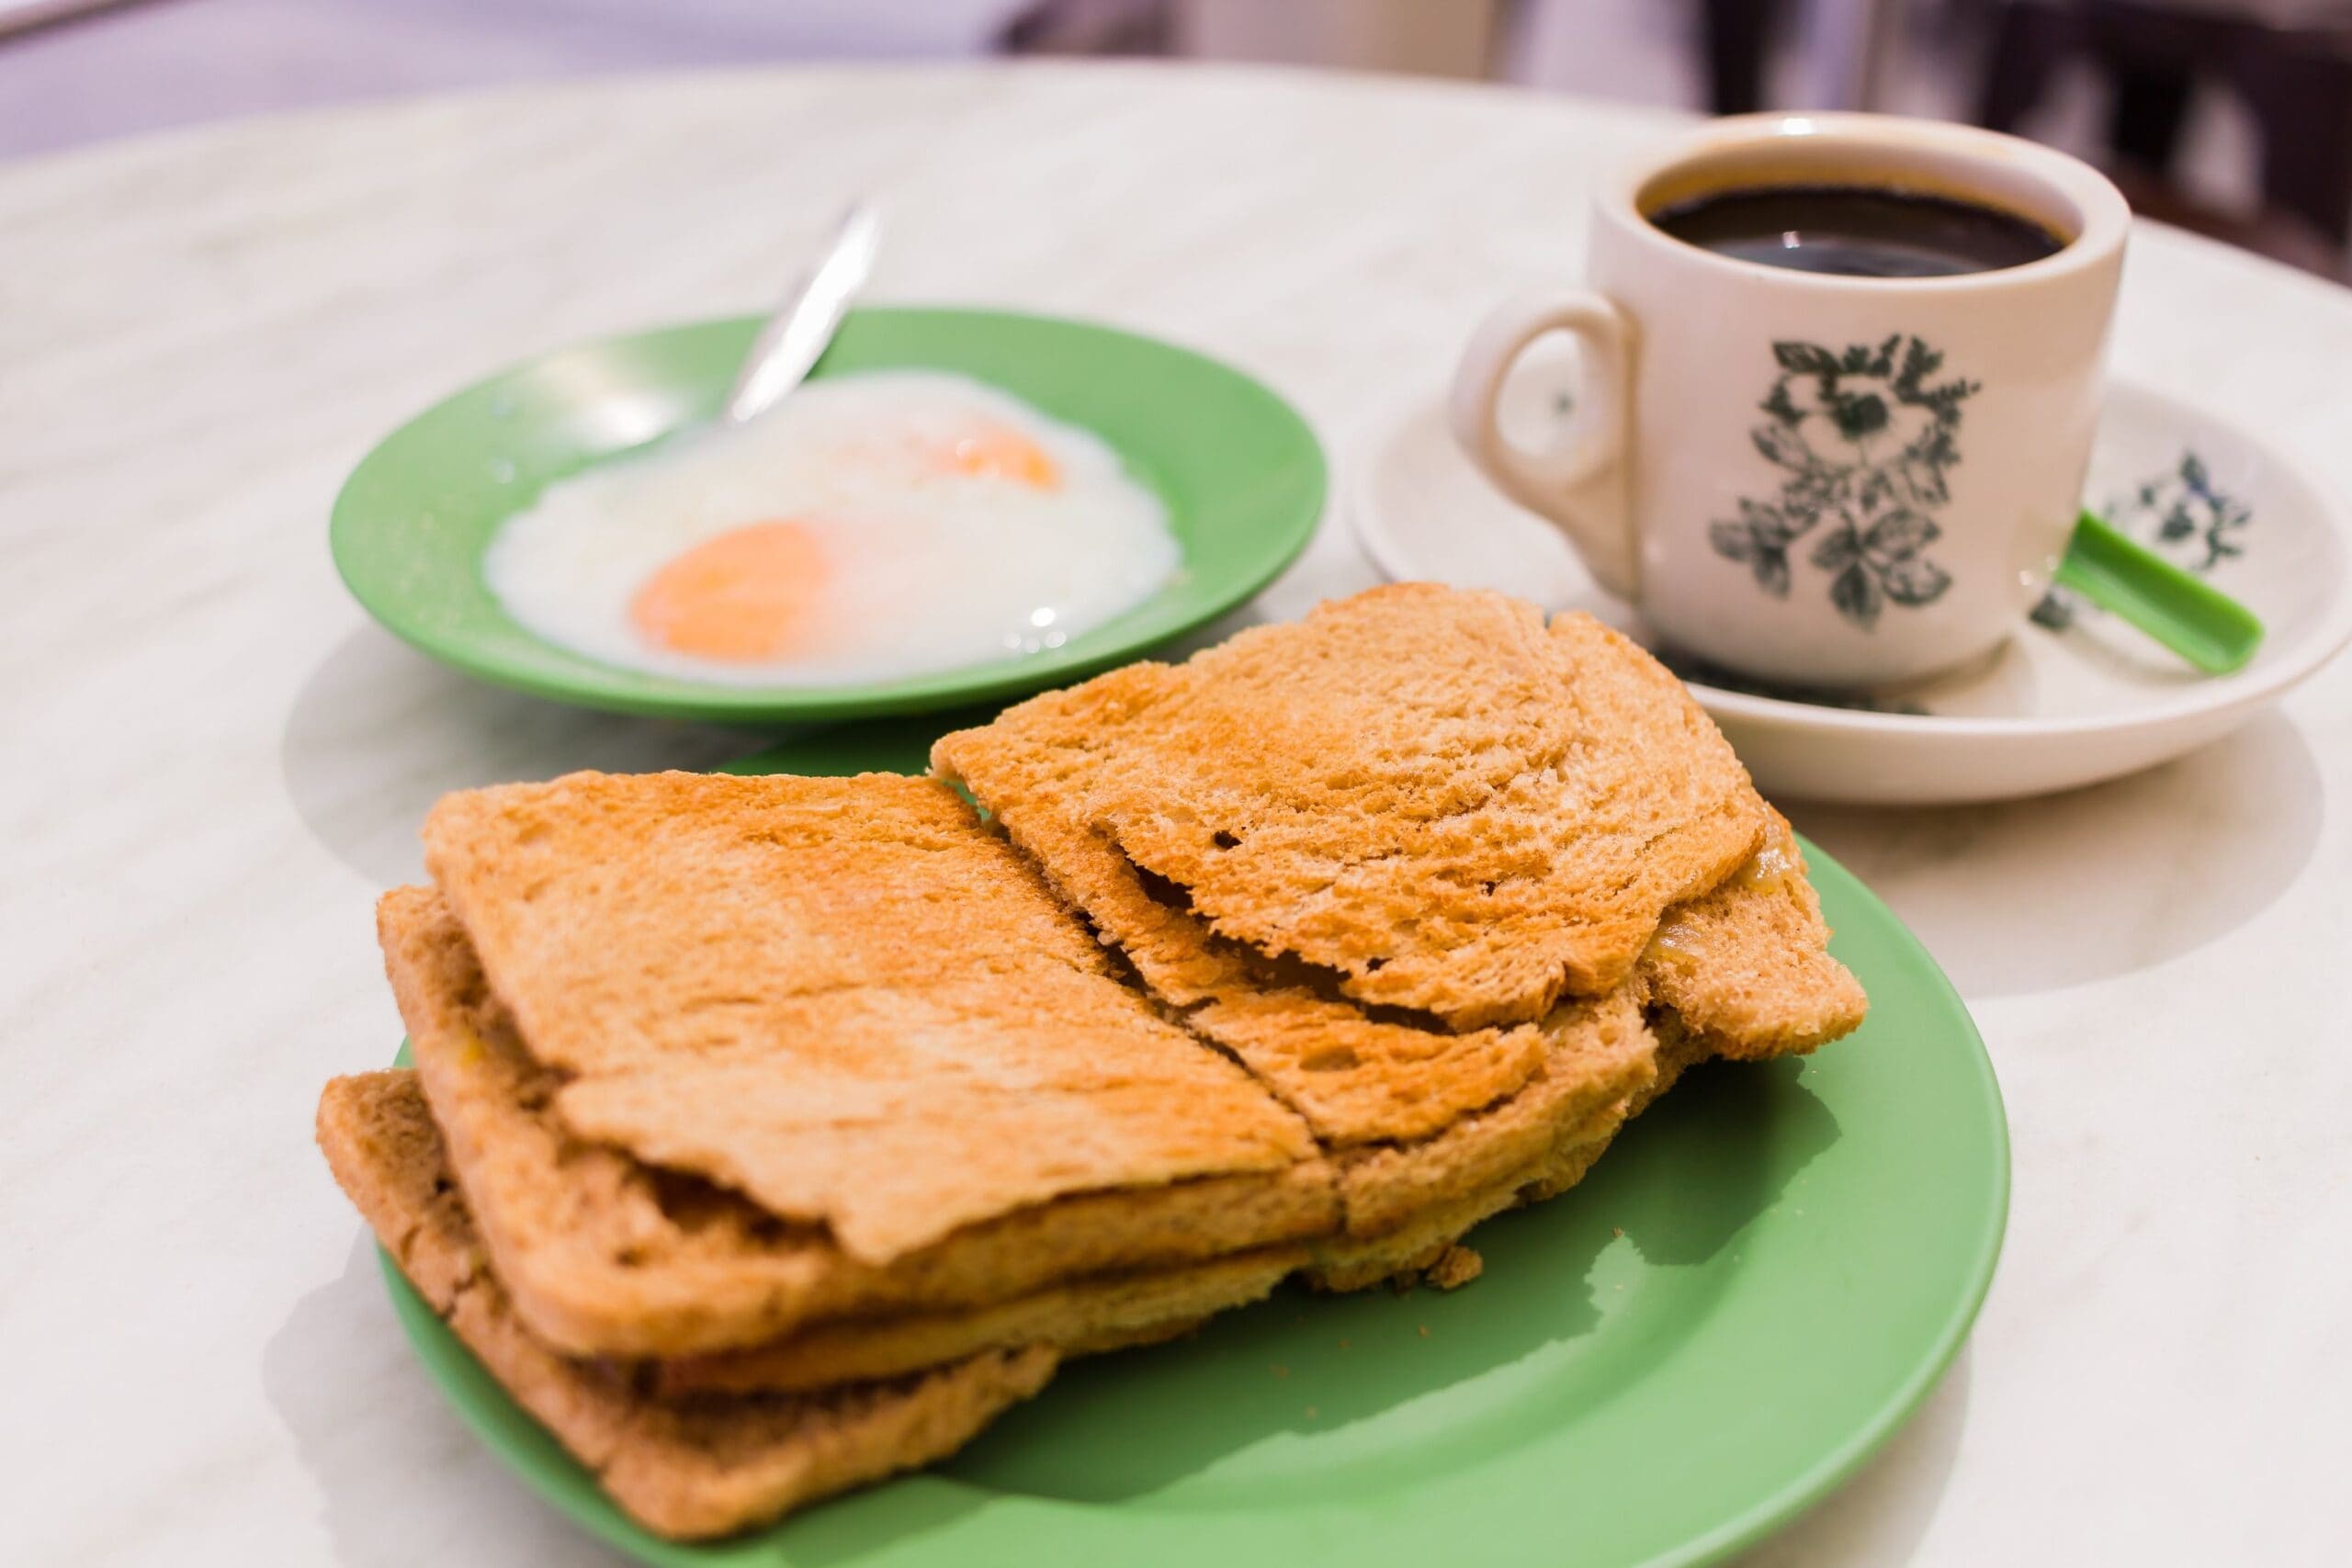 This is the famous breakfast dish of Singapore.